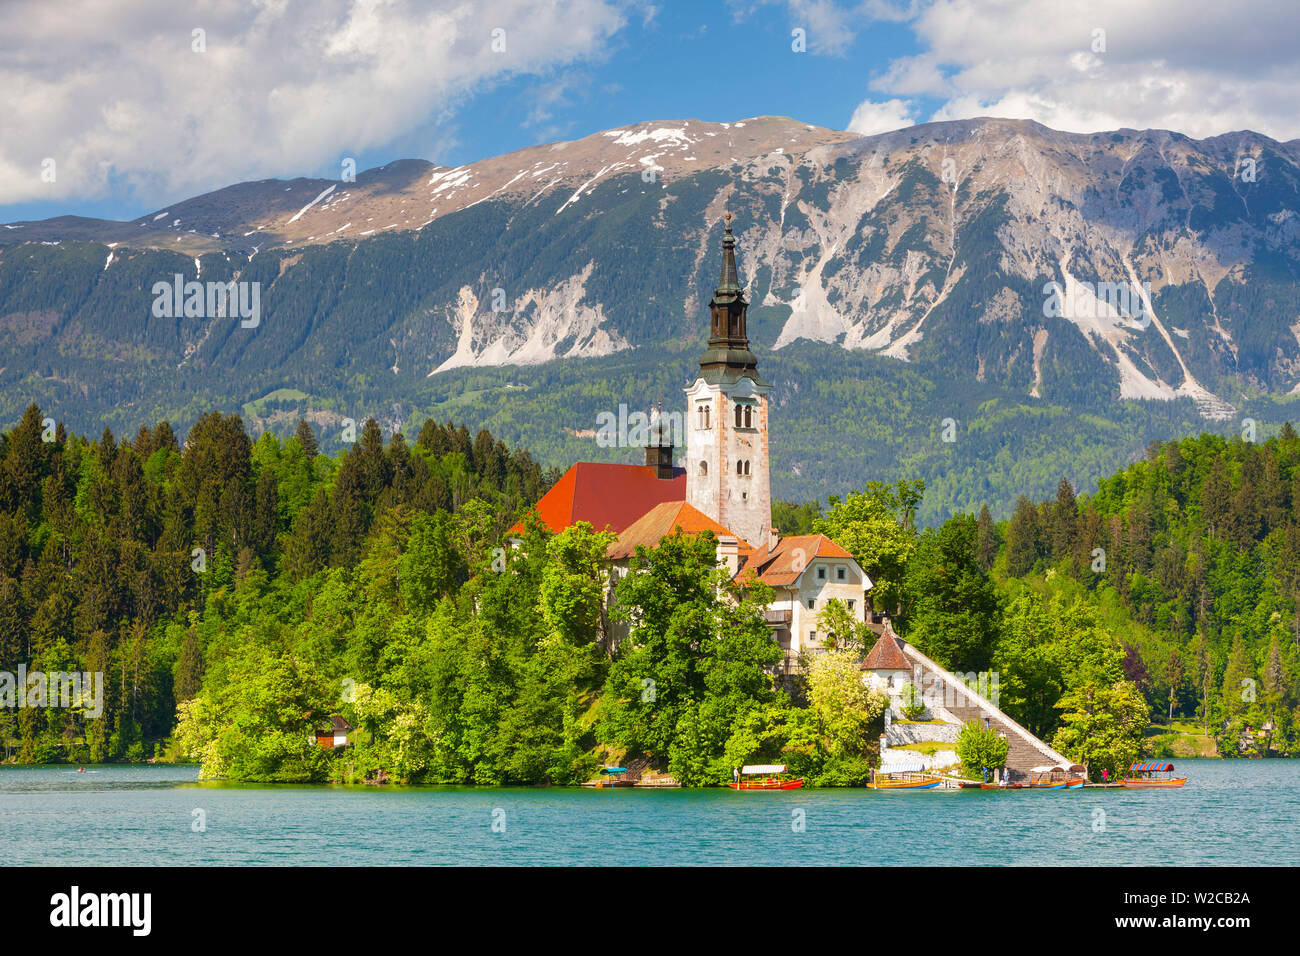 Bled Island with the Church of the Assumption, Lake Bled, Bled, Upper Carniola, Julian Alps, Slovenia Stock Photo